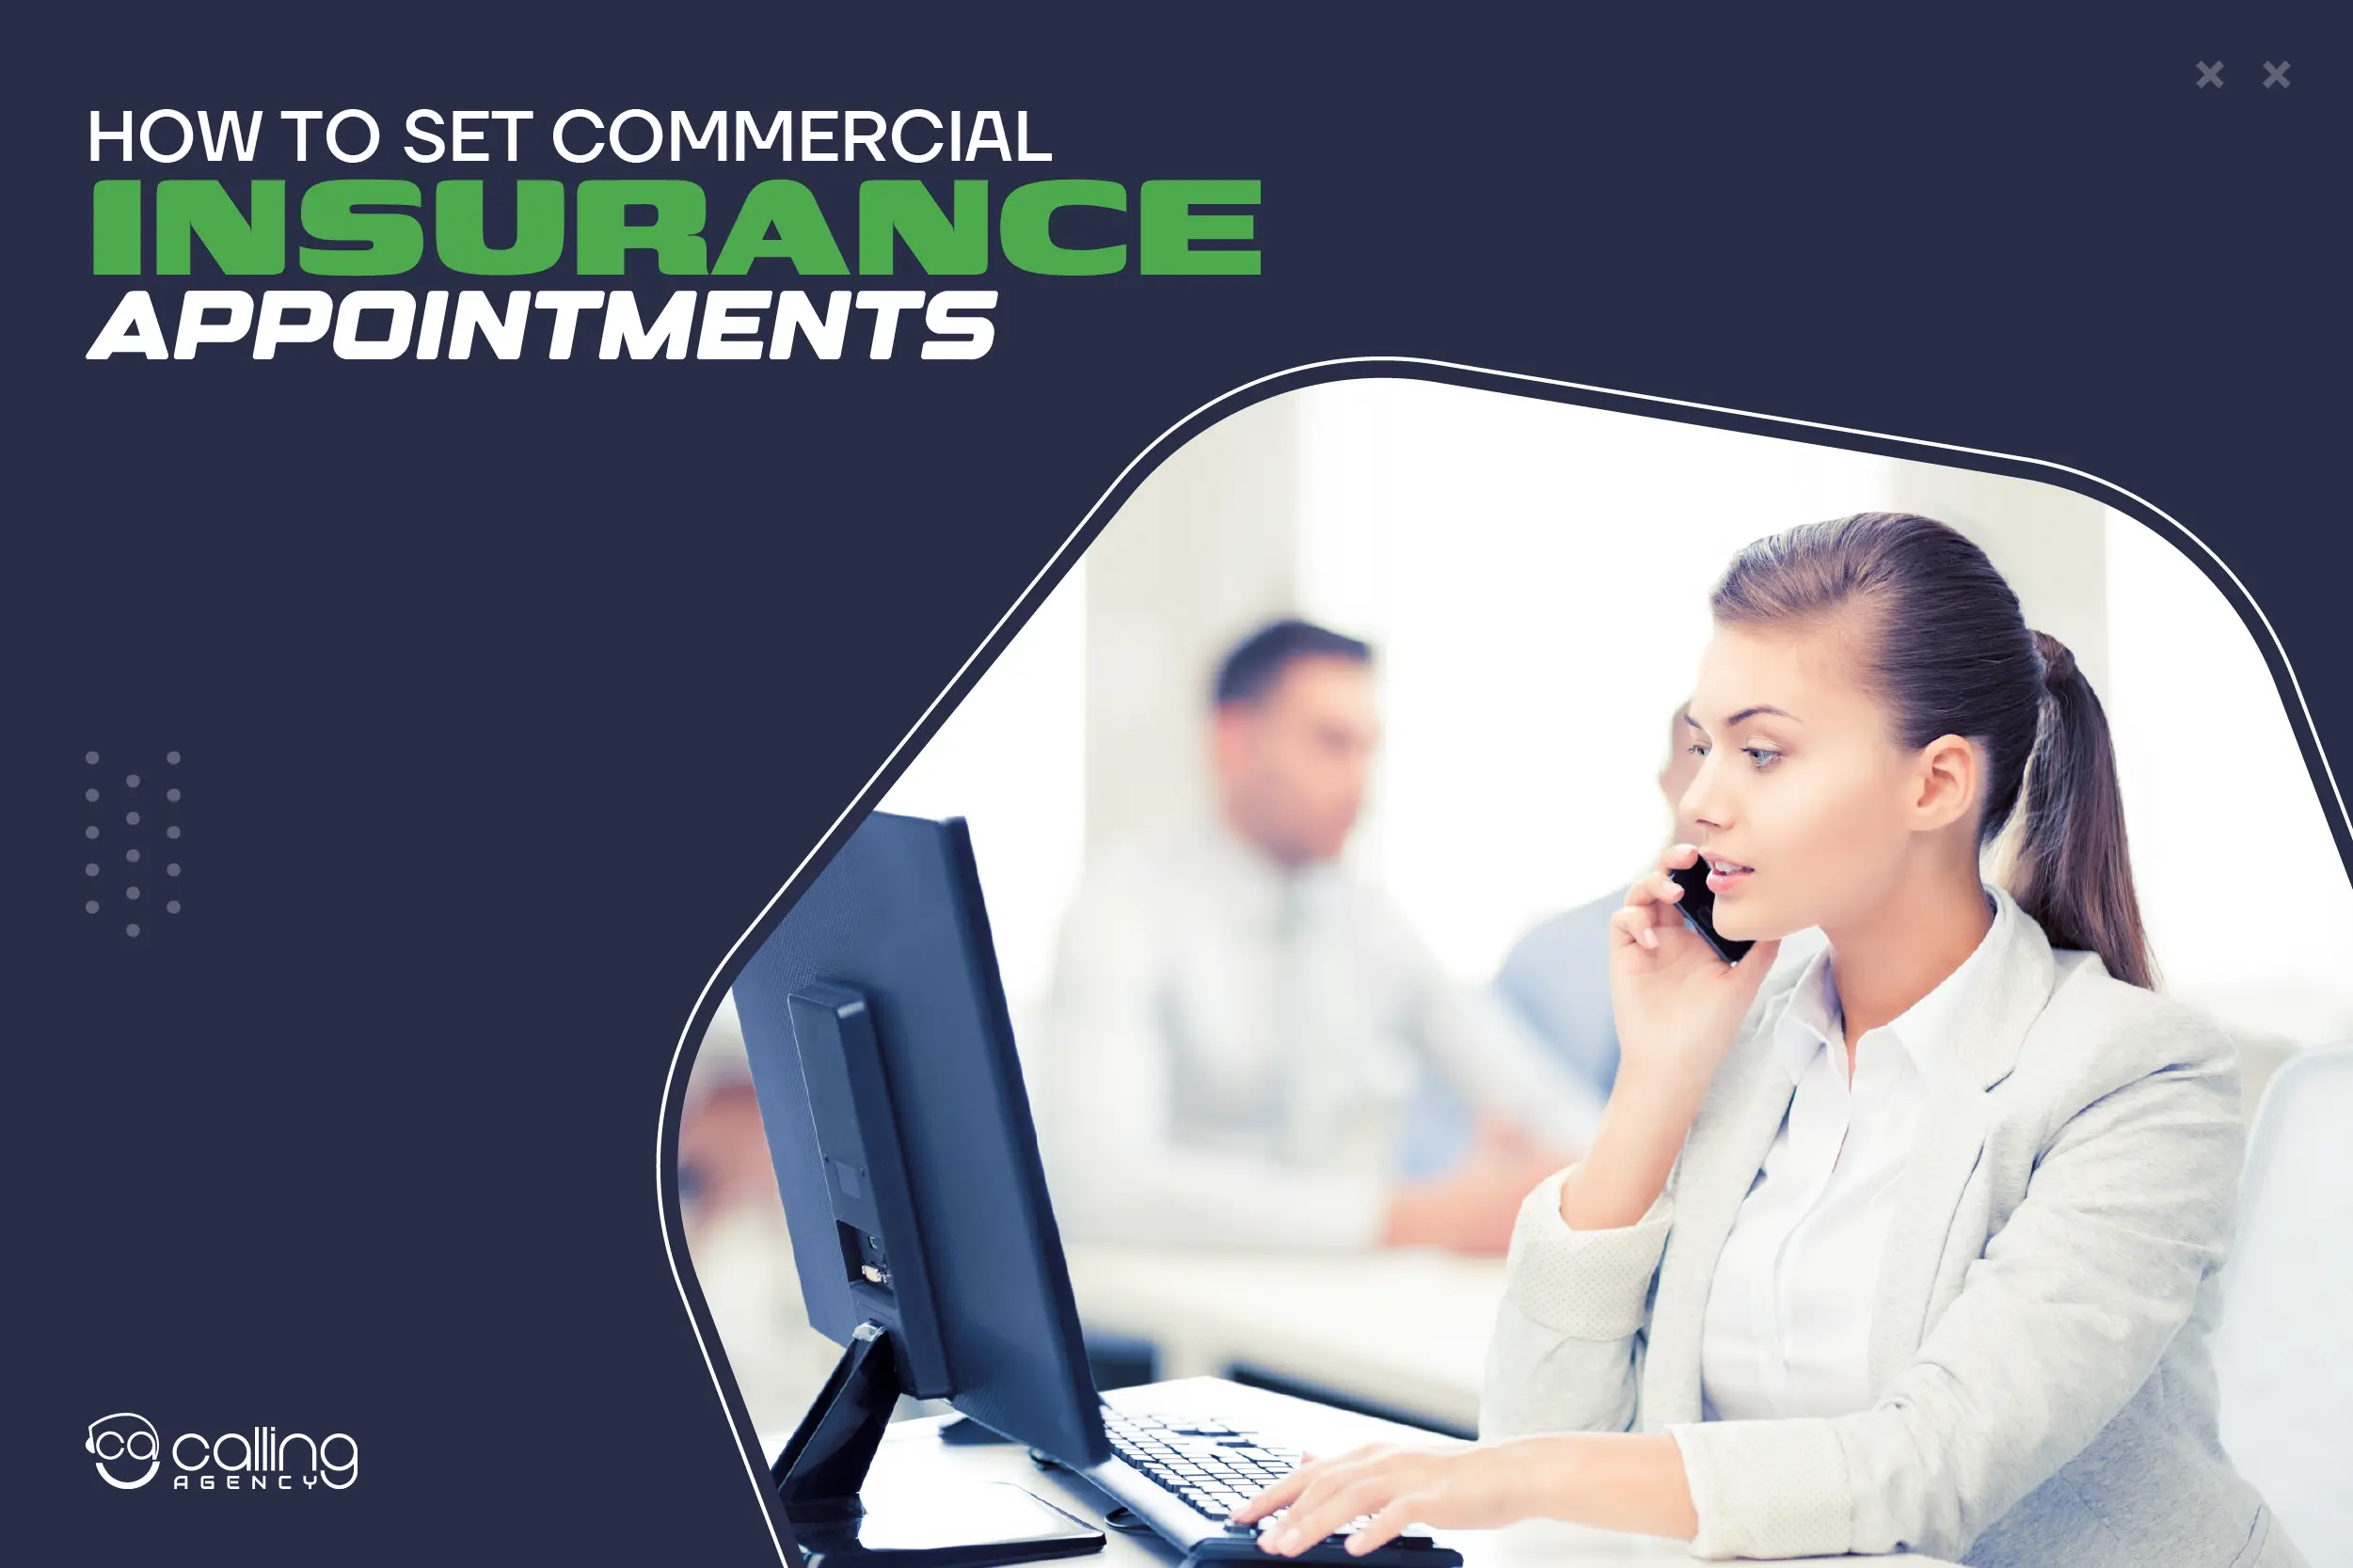 How To Set Commercial Insurance Appointments?